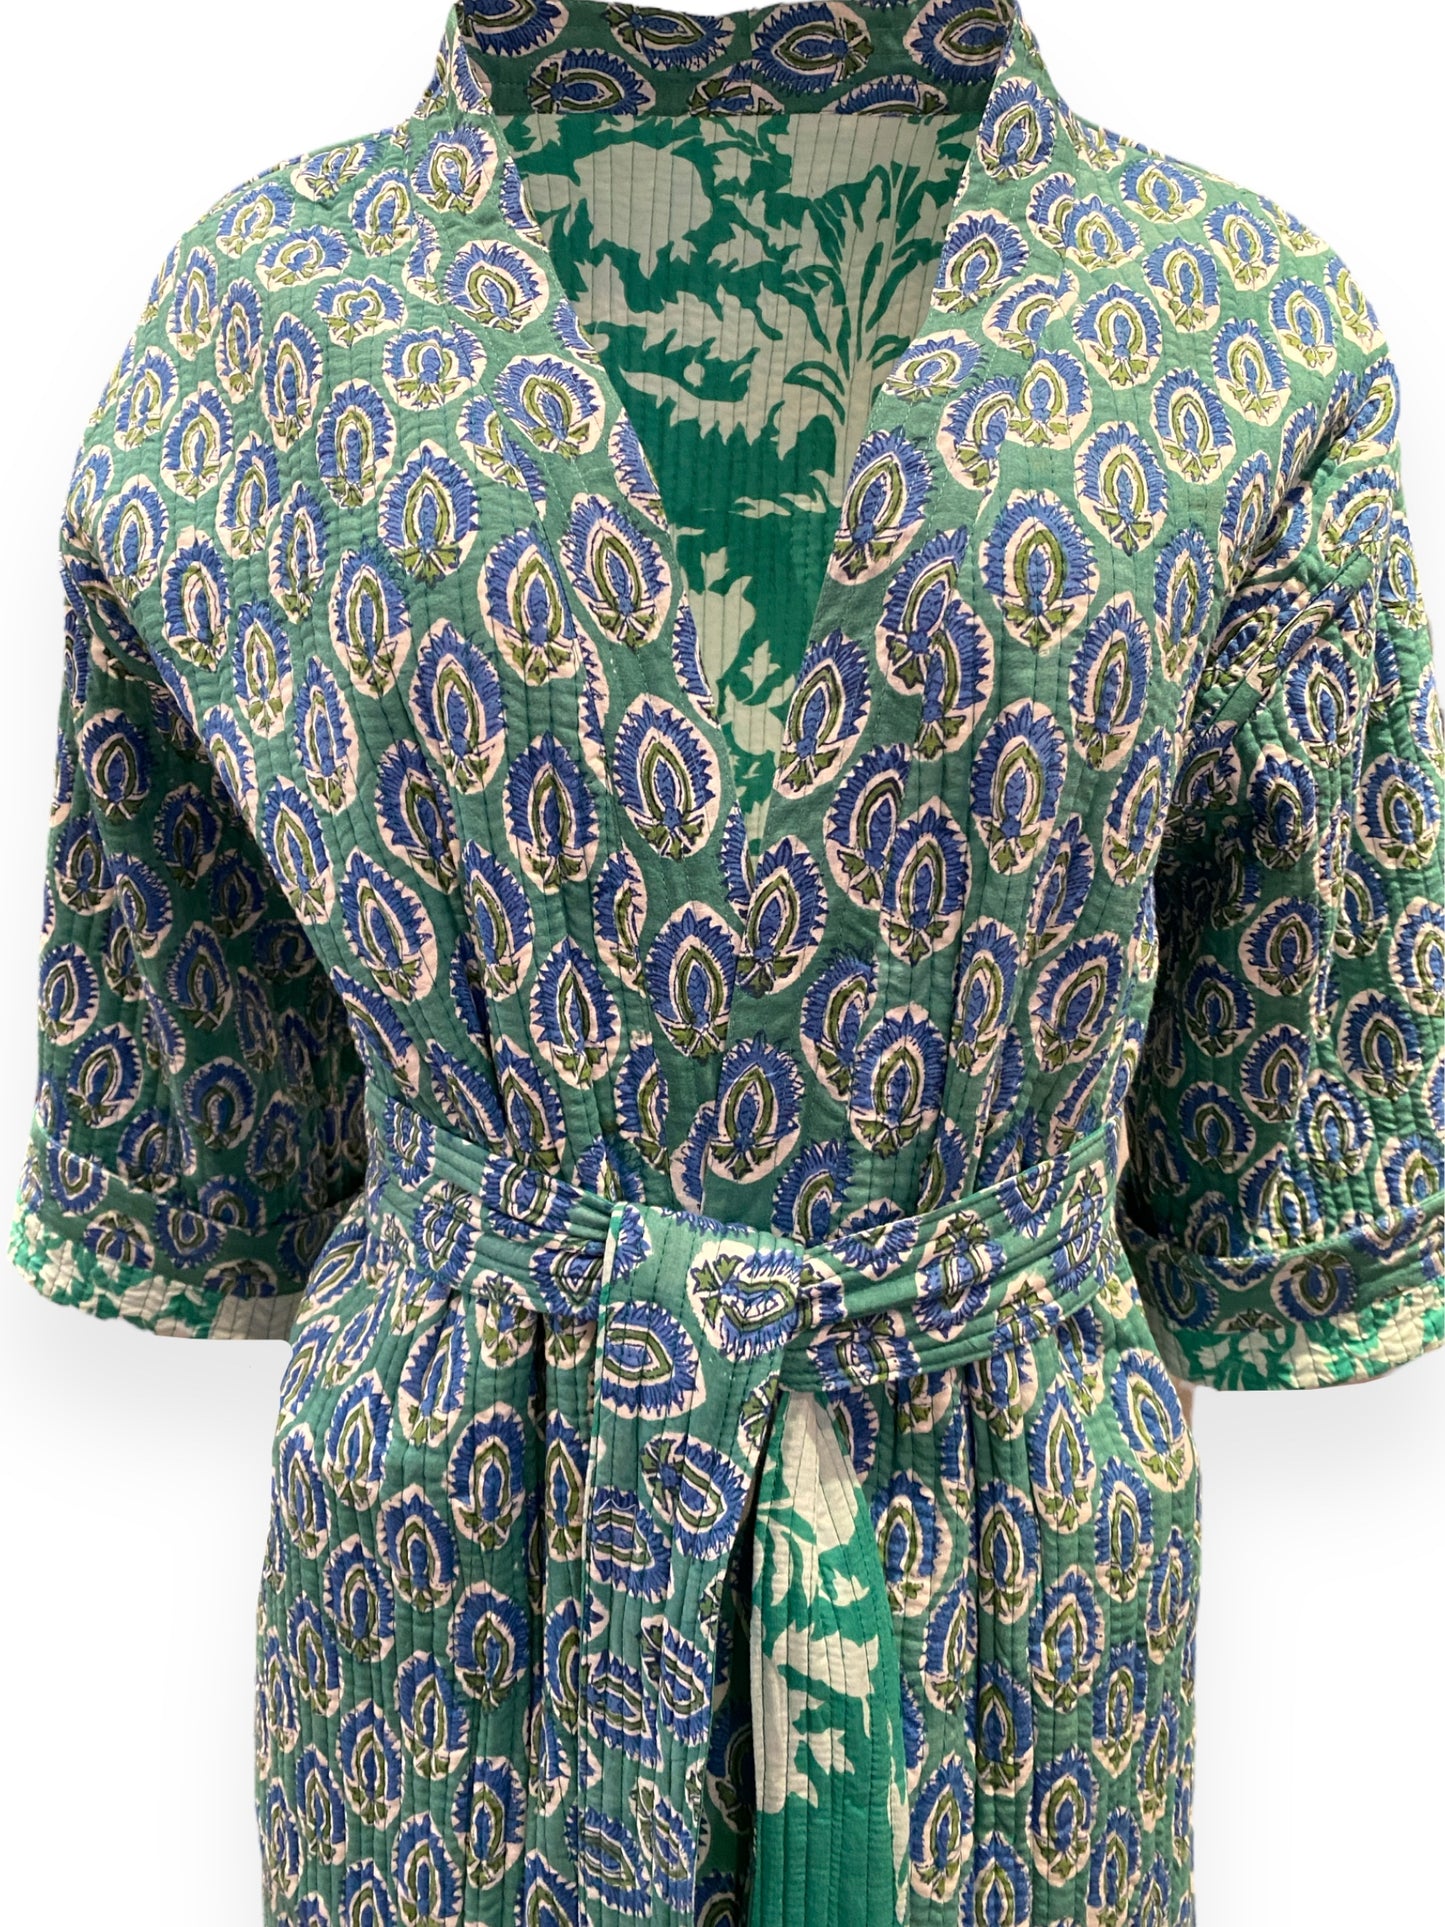 Turquoise Green Reversible Quilted Kimono robe